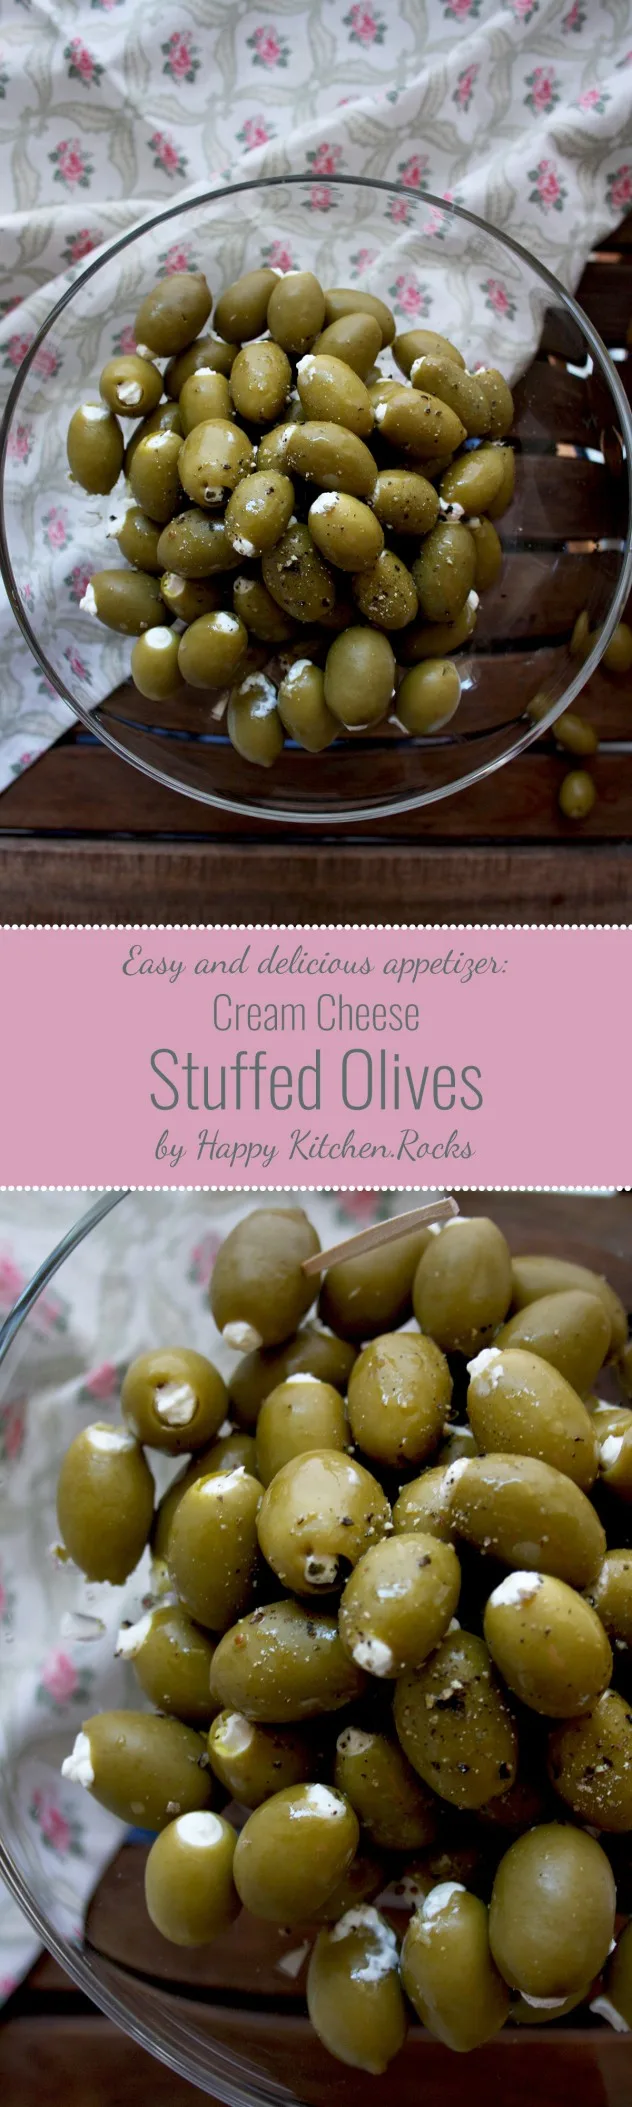 Cream Cheese Stuffed Olives Marinated in Lemon-Infused Olive oil: Impressive and easy 10-minute appetizer made with only 4 ingredients! Quick, gluten-free, low carb and vegetarian.